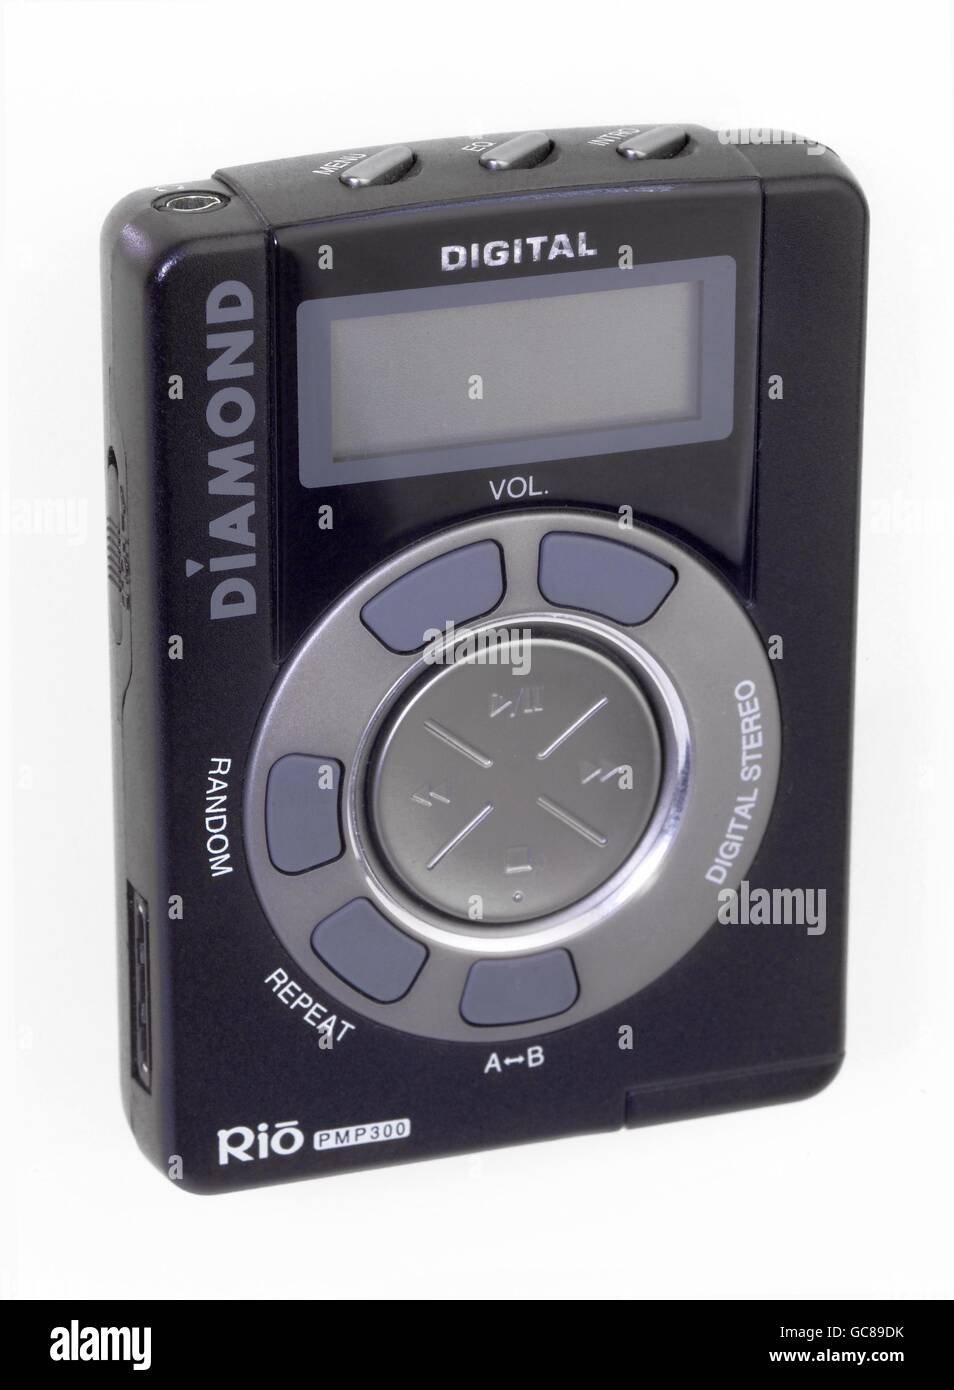 technics, MP3 player, Diamond Rio PMP 300, USA, 1998, Klingendes Museum Riedenburg, 1990s, 90s, 20th century, historic, historical, technic, electronics, home electronics, consumer electronics, entertainment electronics, home entertainment, invention, MP-3, MP 3, digital, audio, sound, portable, clipping, cut out, cut-out, cut-outs, Additional-Rights-Clearences-Not Available Stock Photo